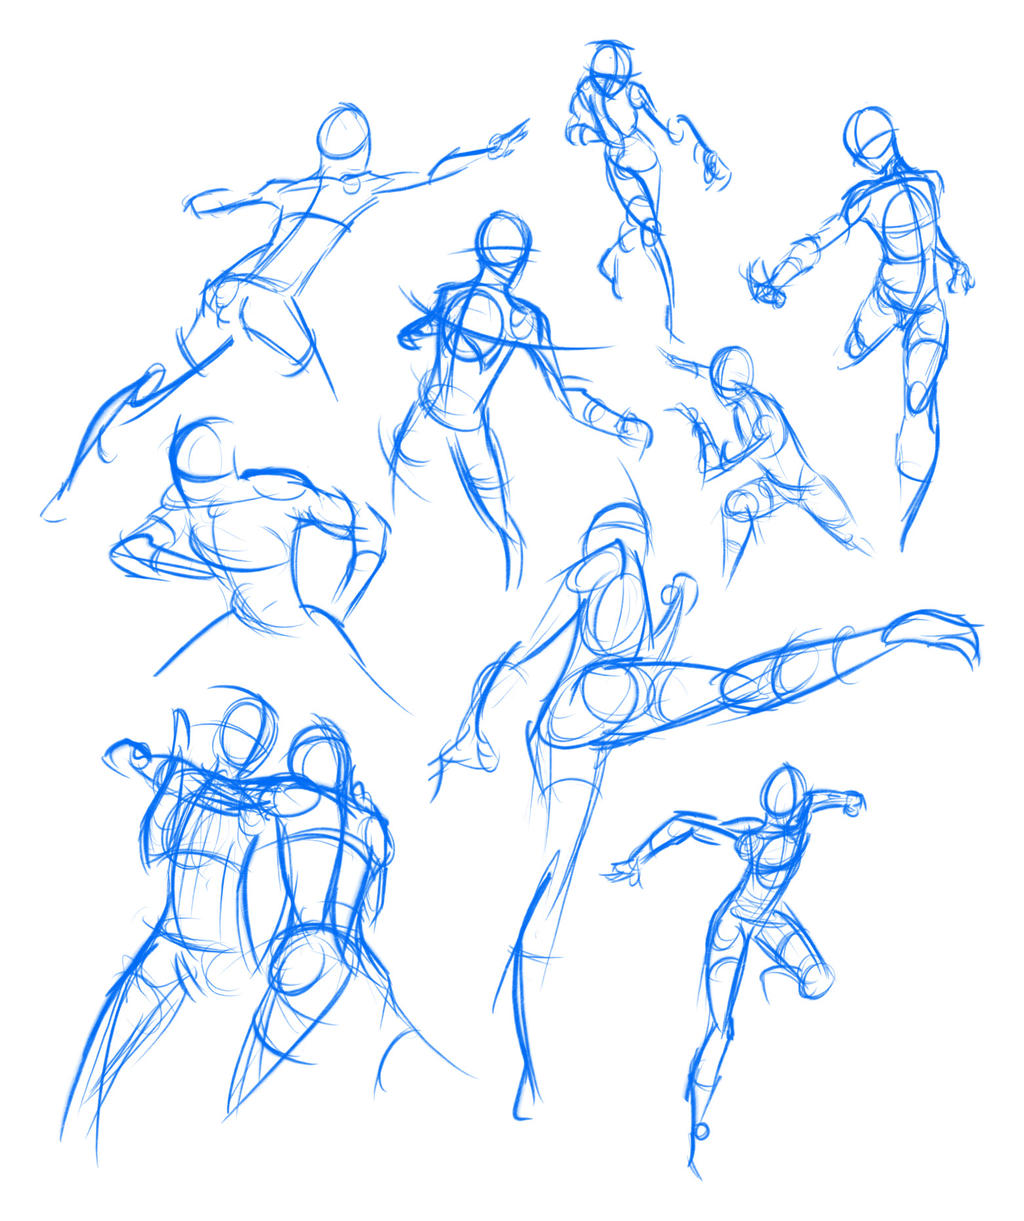 10-15-14 Combat Gesture by Patchy9 on deviantART